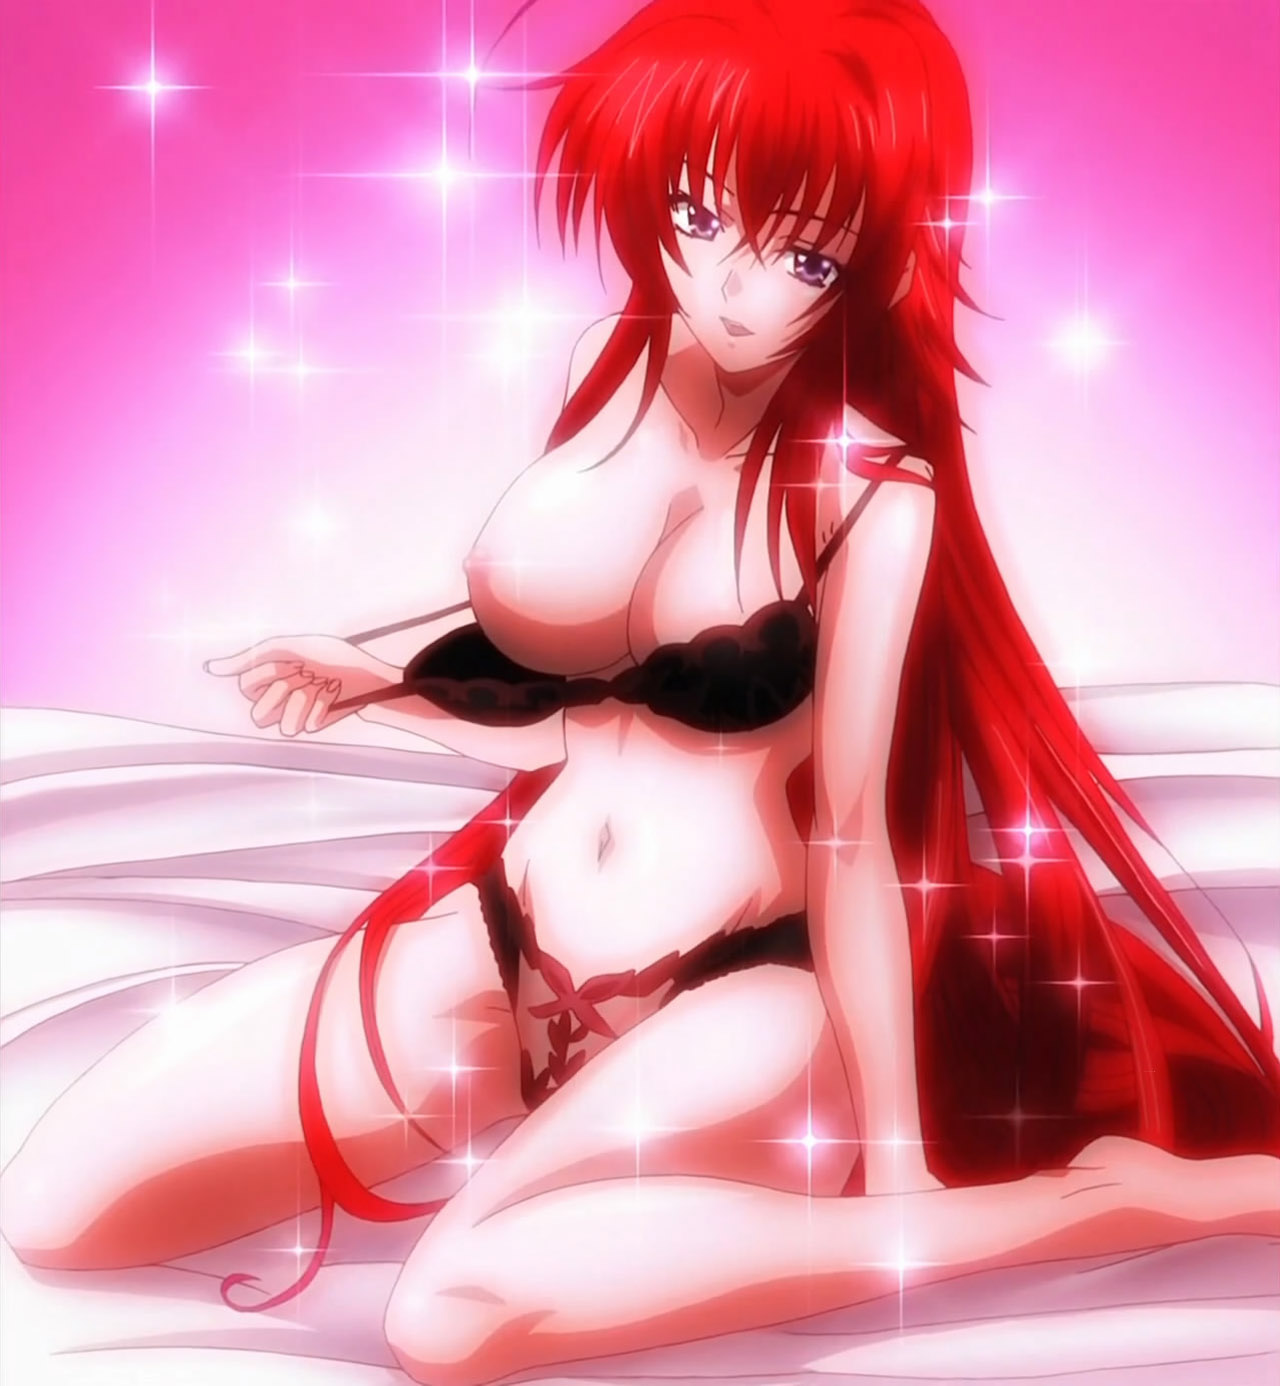 I hate to say it, but to me High School DxD works best... 